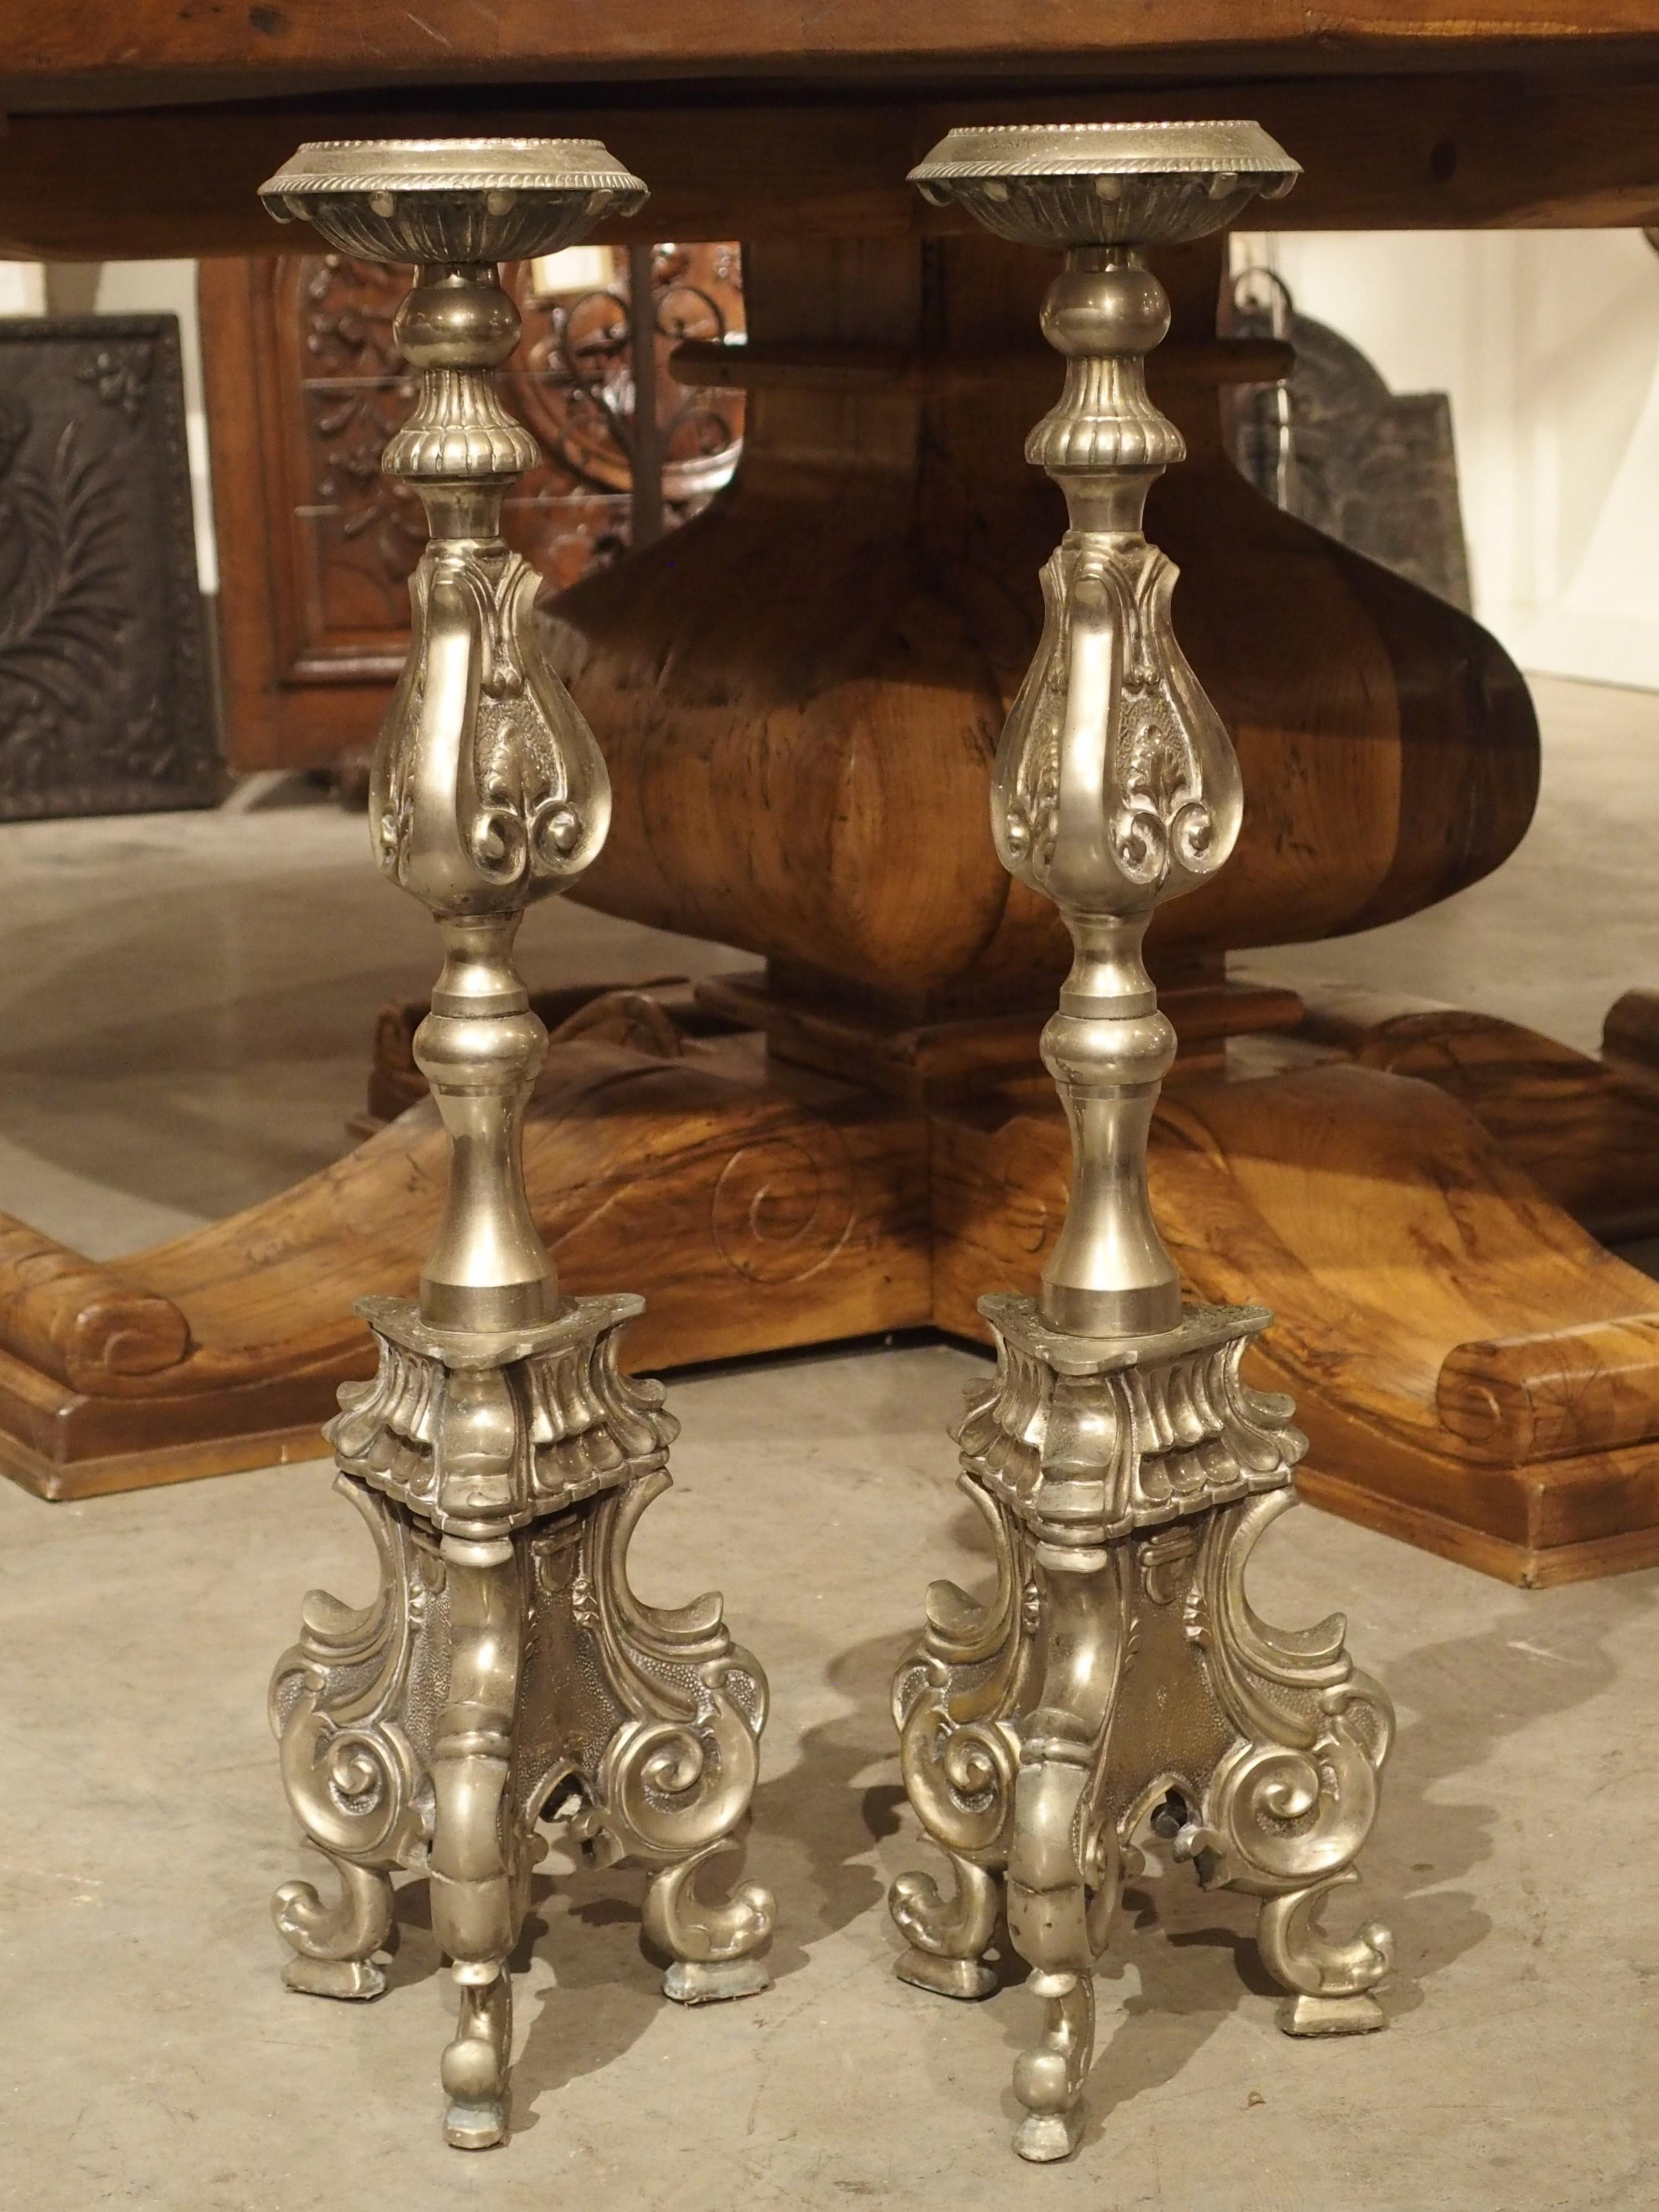 This pair of ornate silvered bronze candlesticks is from Italy, circa 1880. Each candlestick has a large round candle platform with beading on the interior rim and spiral fluting on the outer edge. Each can hold candles up to 3 1/2 inches in